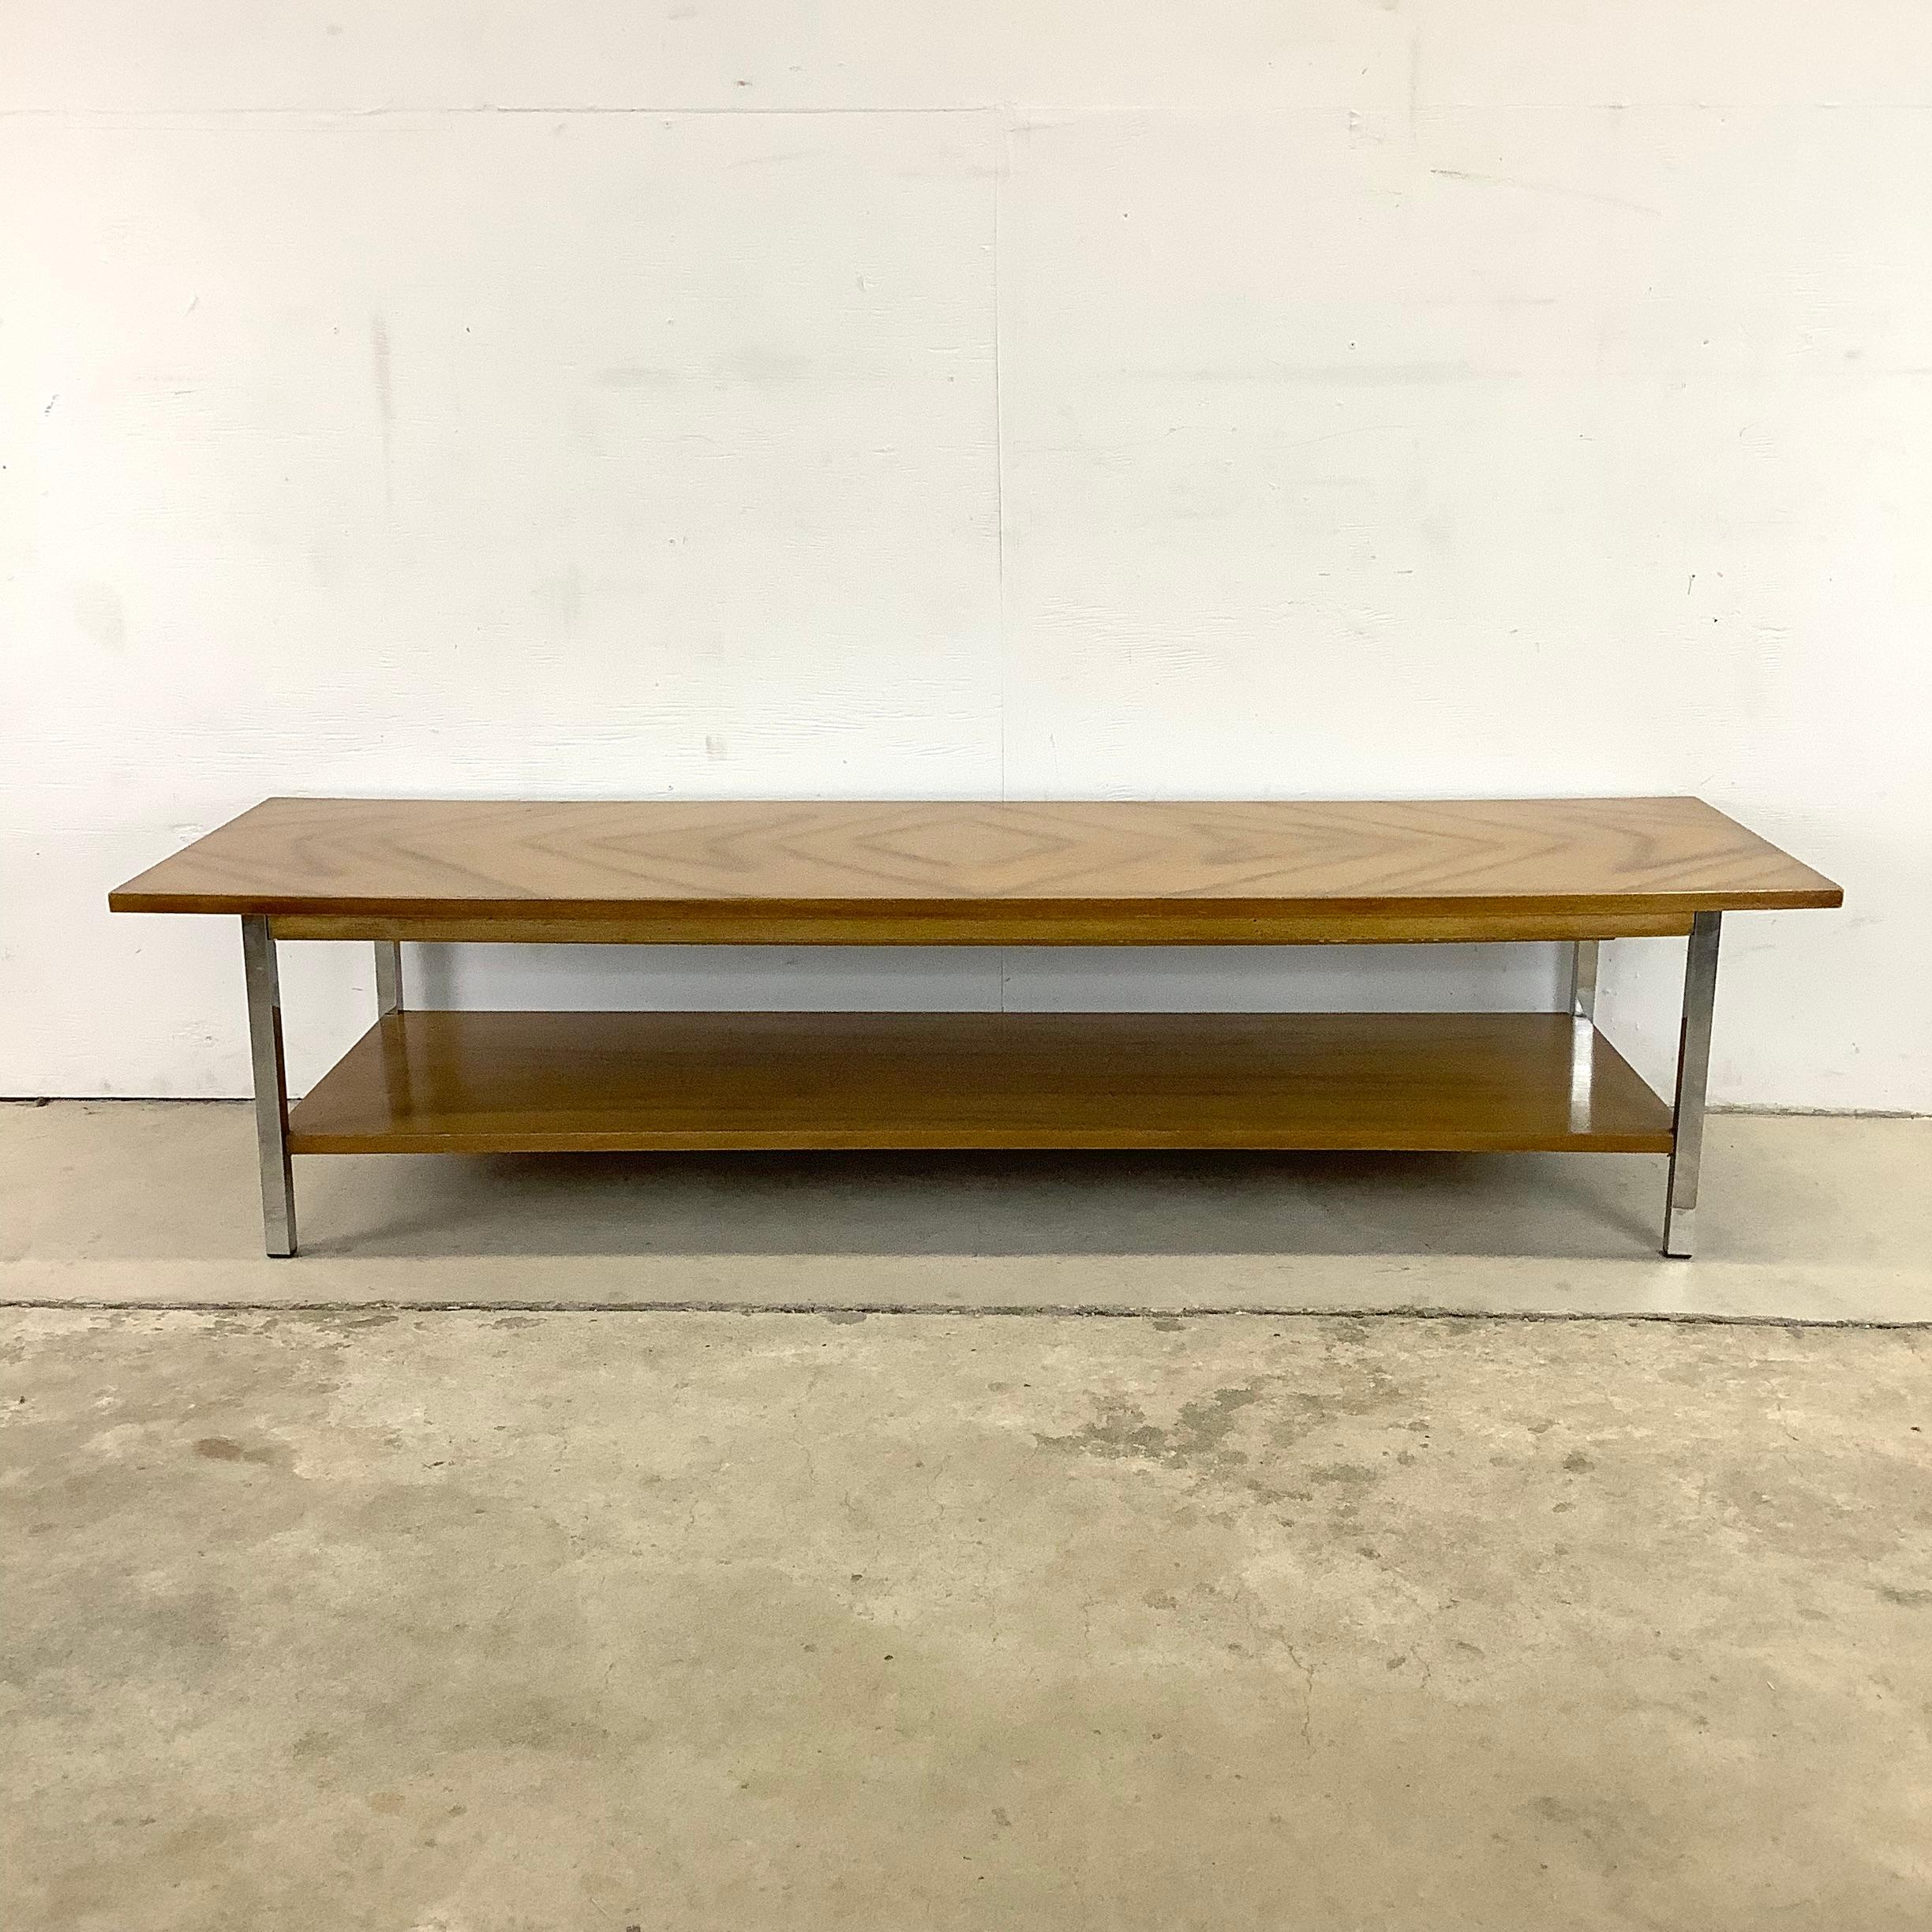 This stylish midcentury coffee table features a striking matched wood finish with sturdy chrome frame. The two tier design features substantial vintage construction and makes a striking mcm addition to any interior setting-

Dimensions: 54w 17.75d